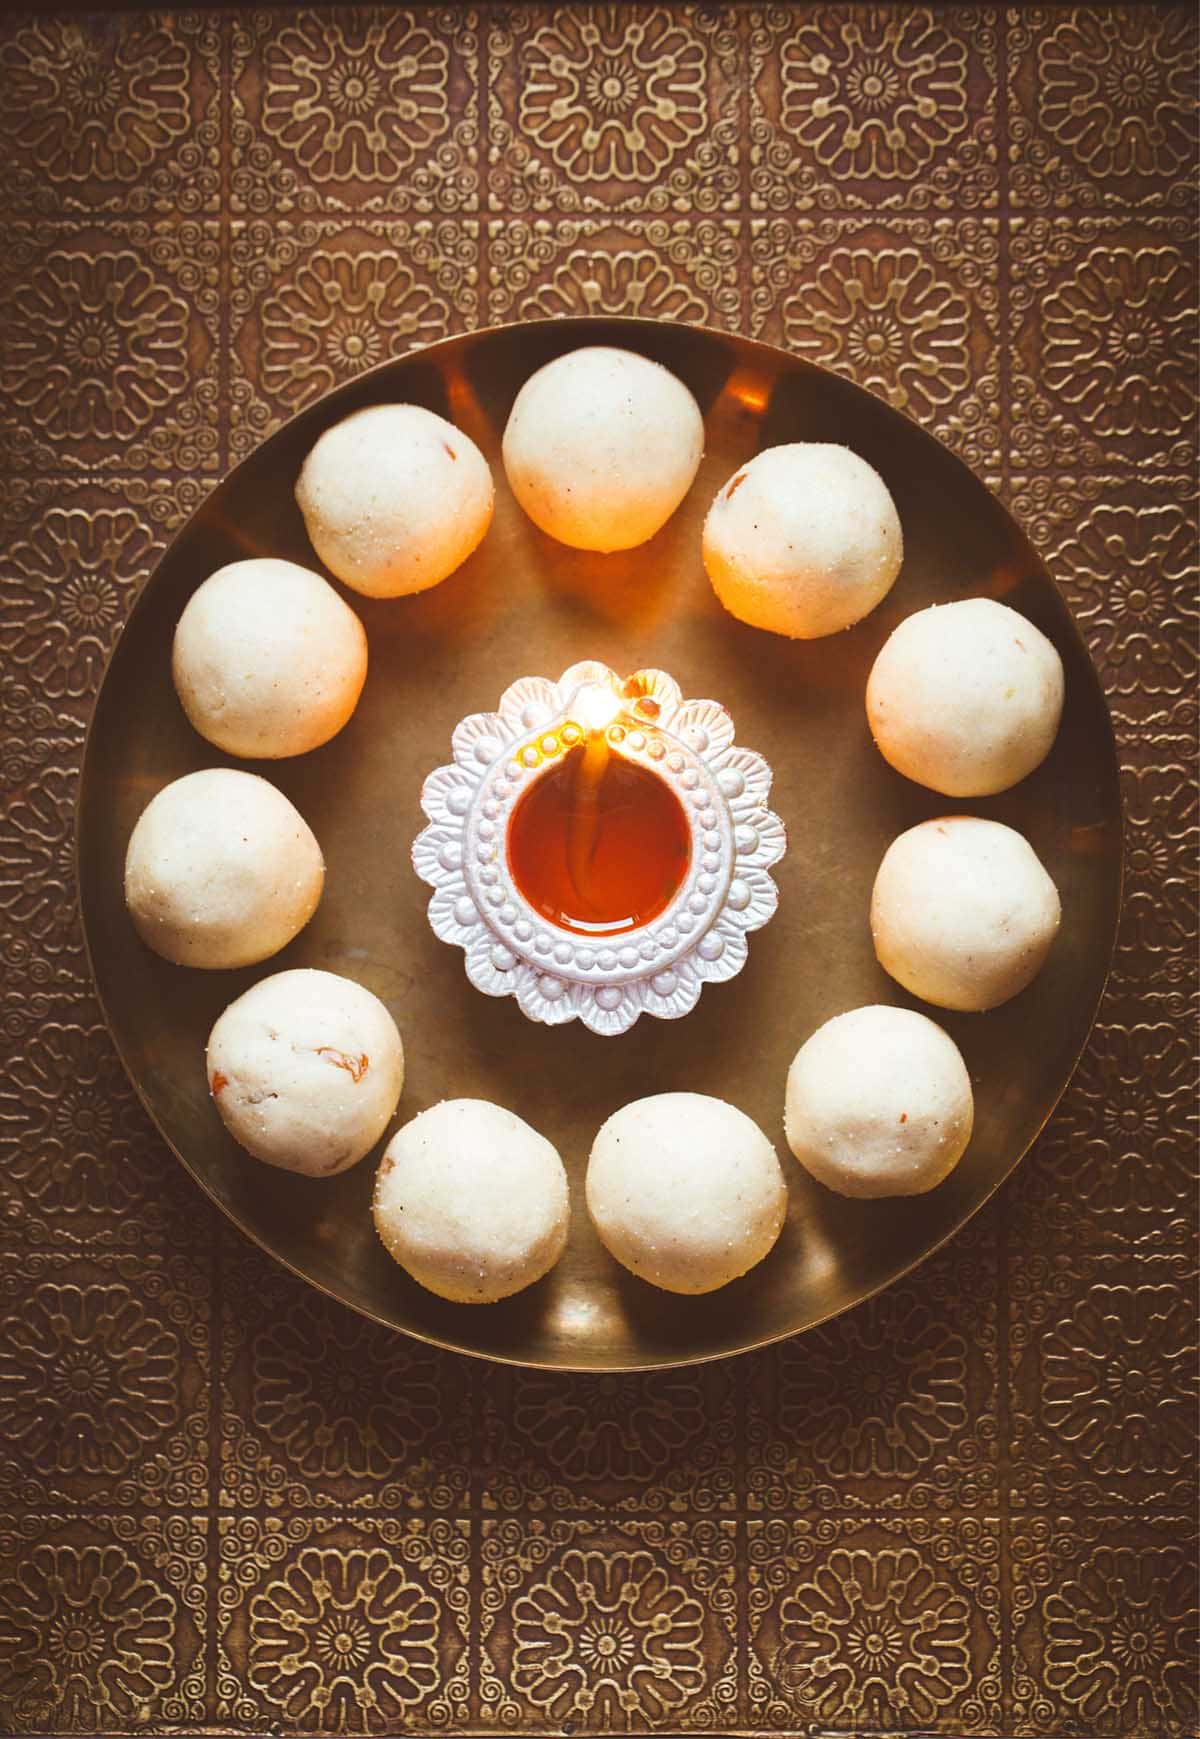 rava laddu in a circle with lit earthern lamp in center on a bronze plate.